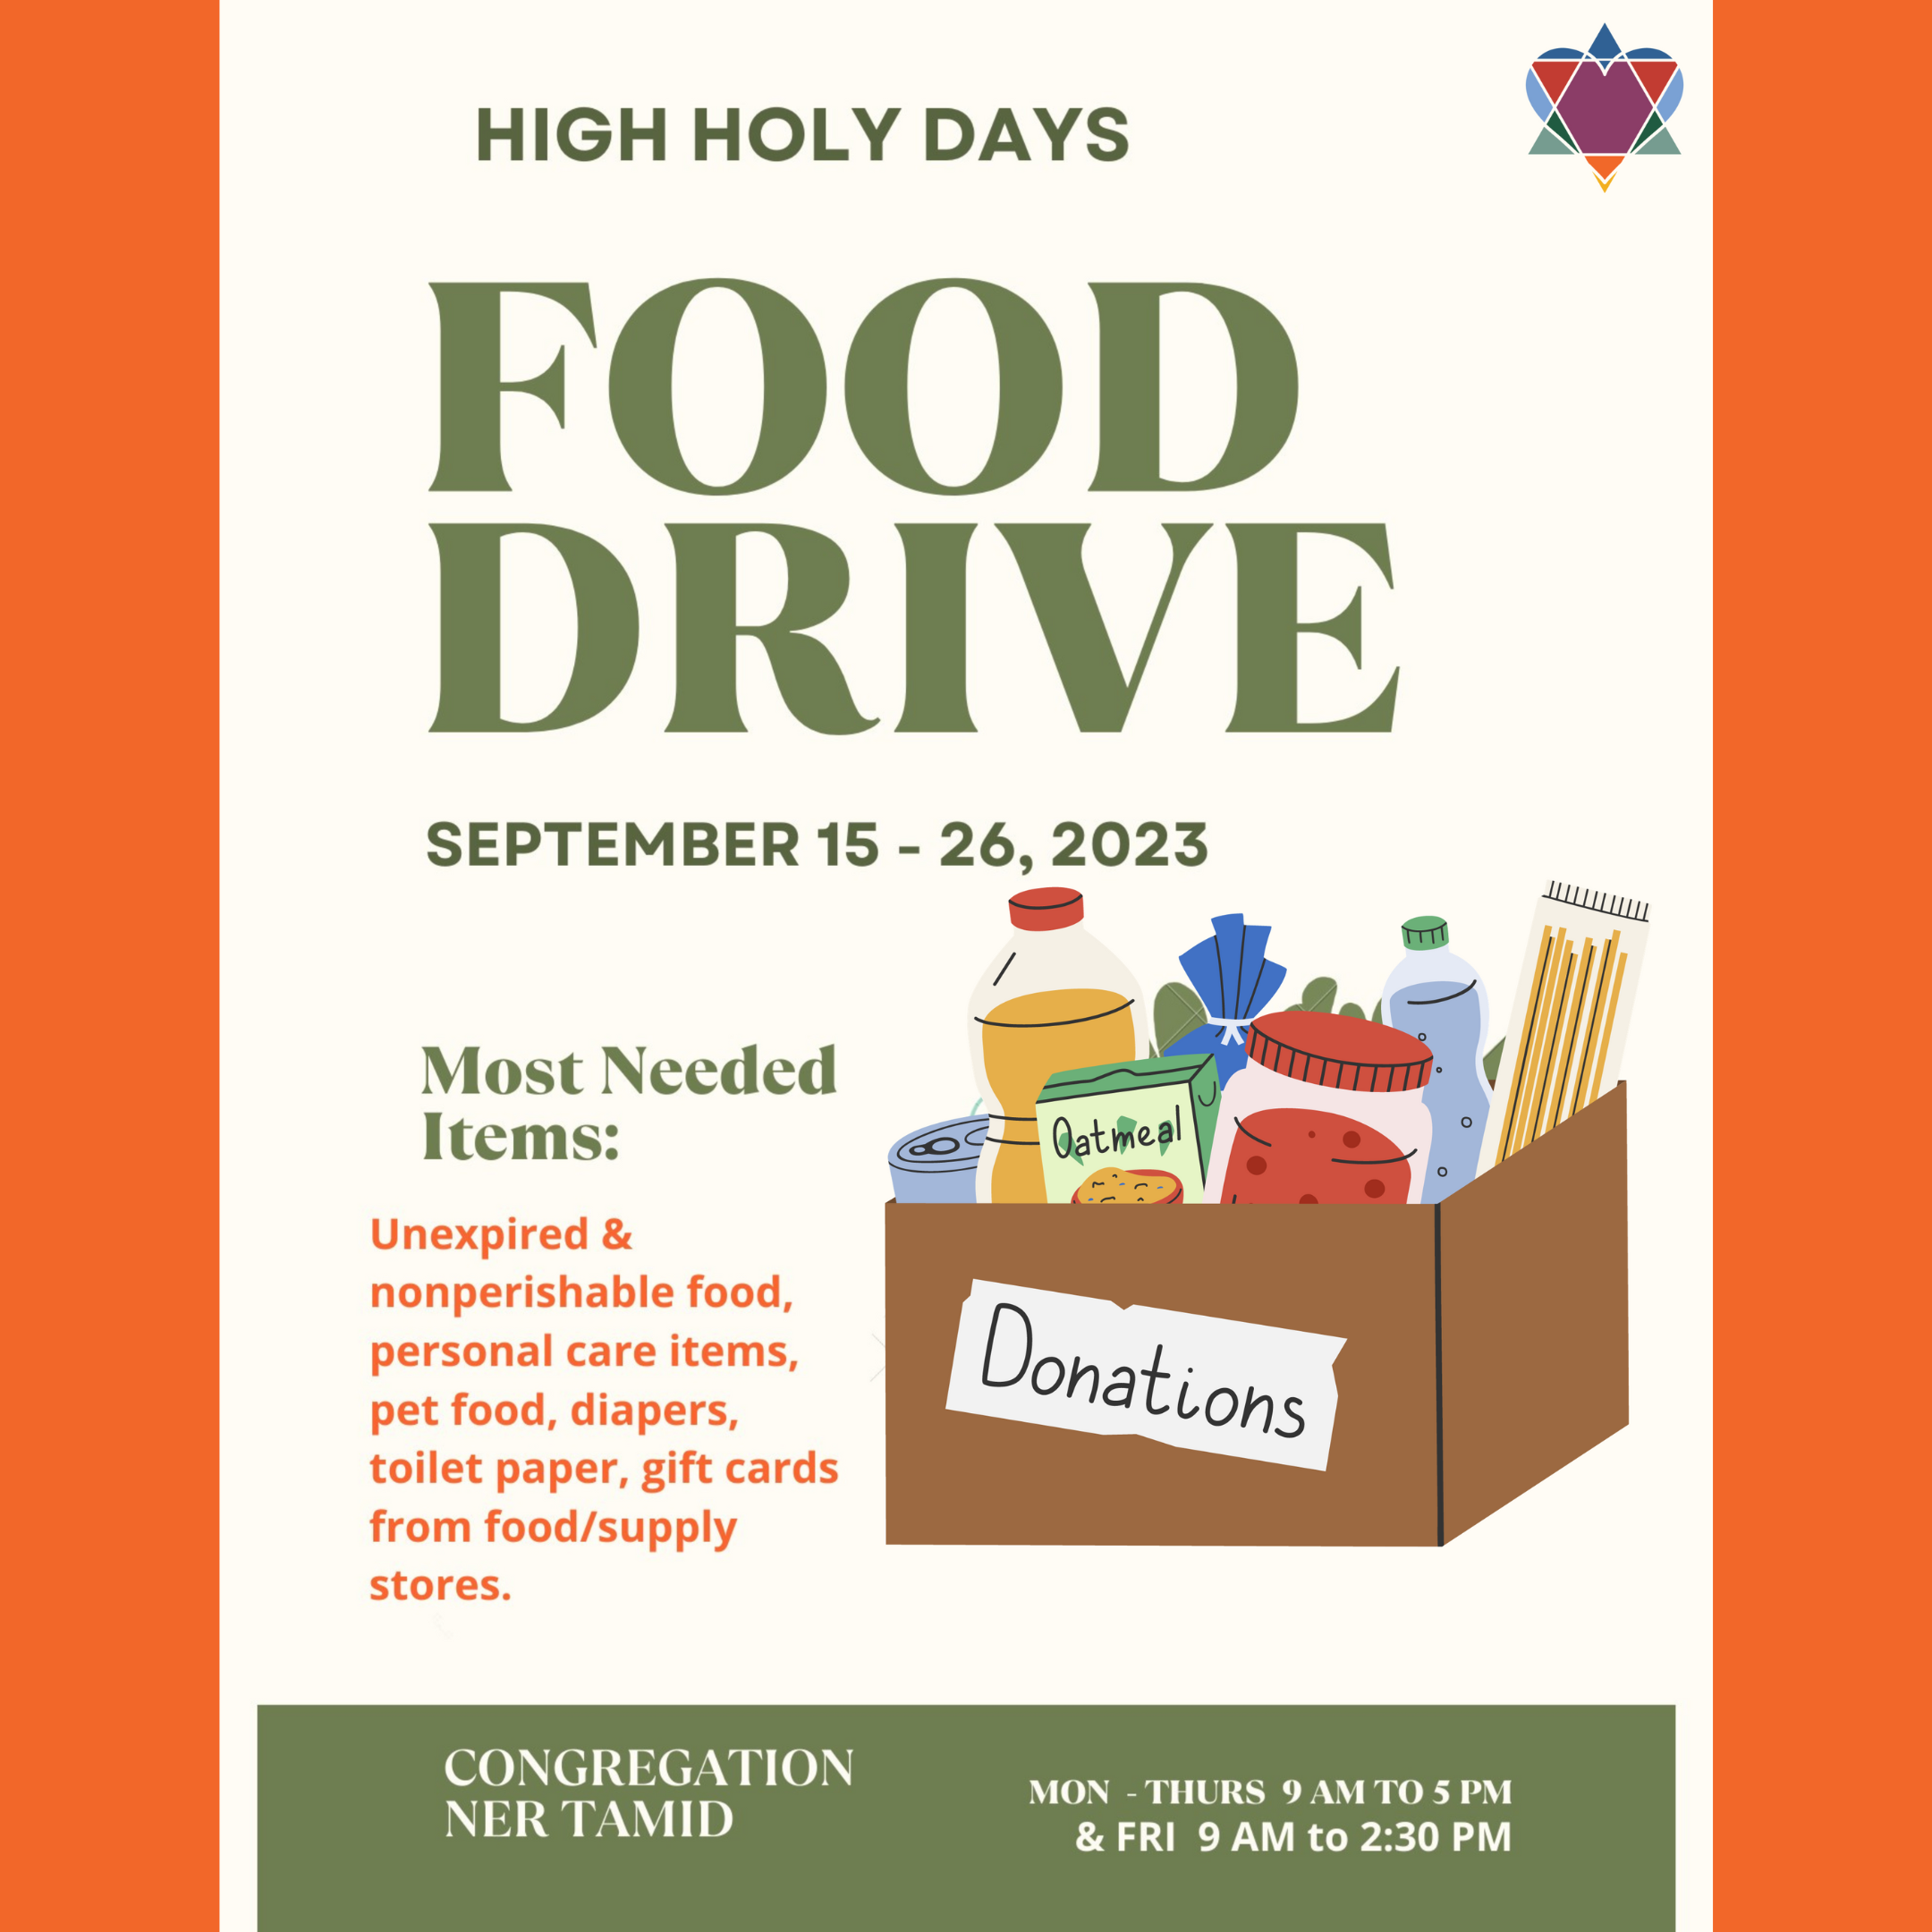 CNT SOCIAL ACTION'S HIGH HOLY DAYS FOOD DRIVE